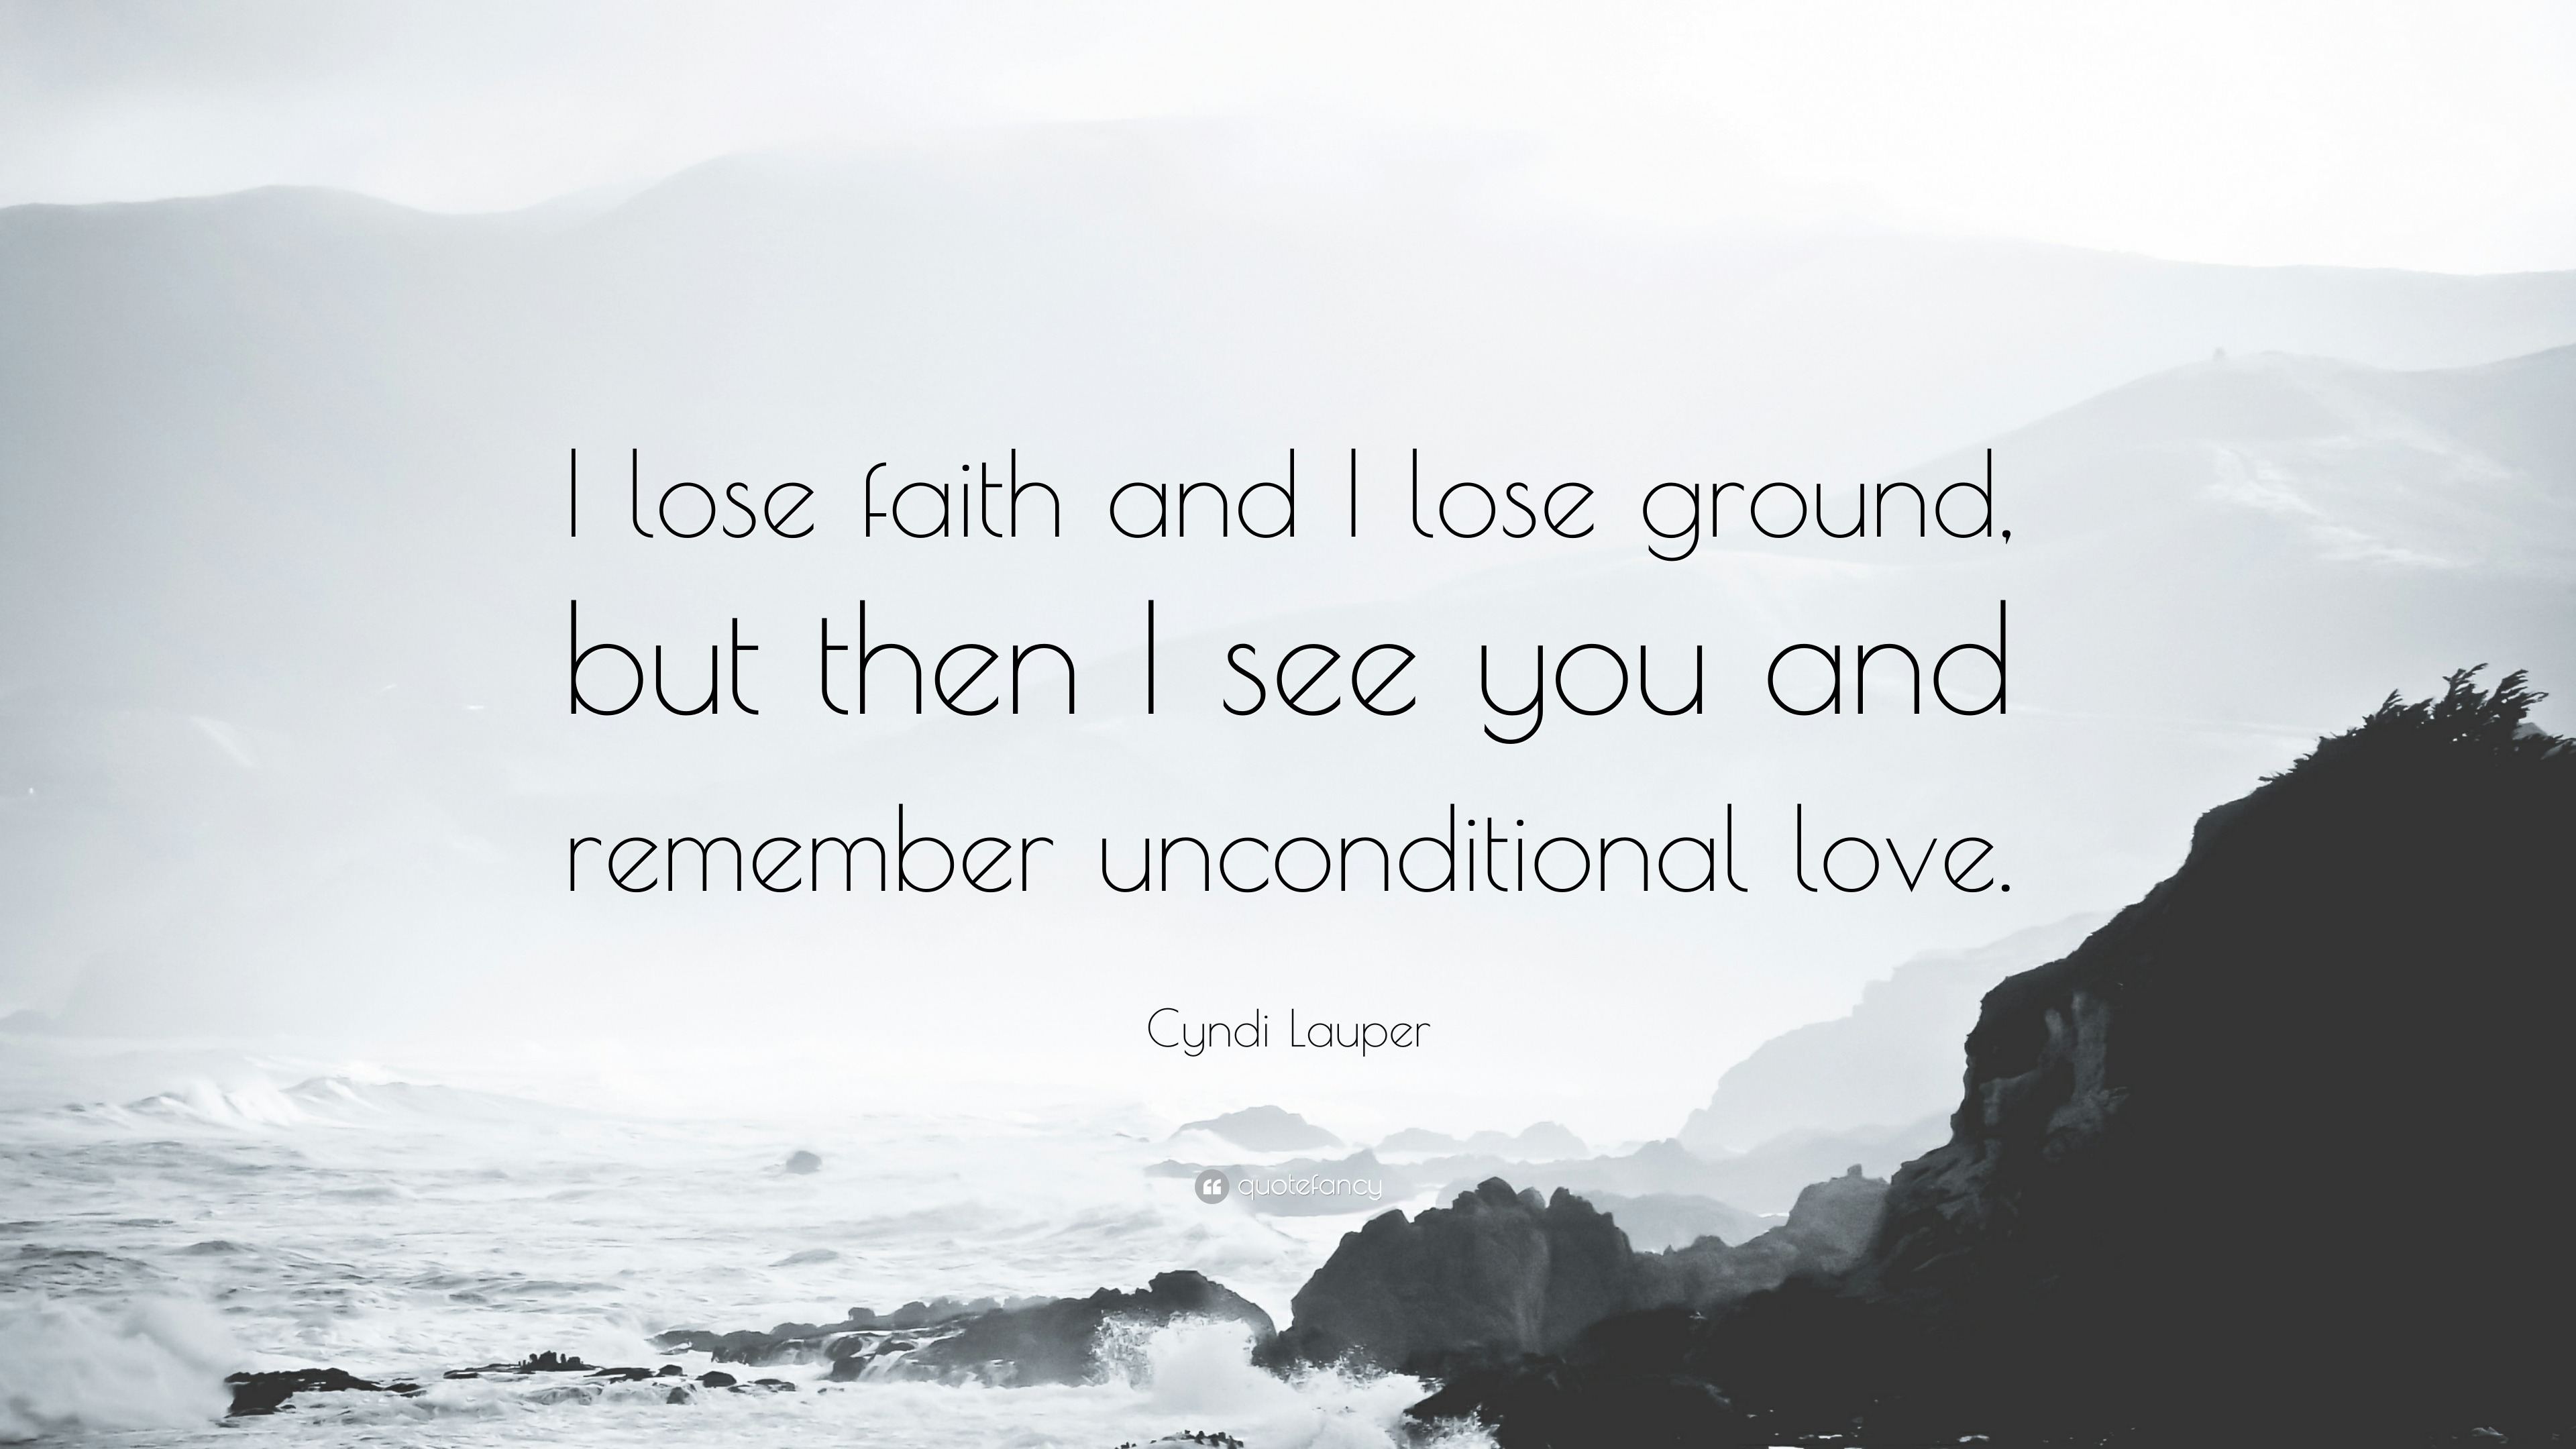 Cyndi Lauper Quote “I lose faith and I lose ground but then I